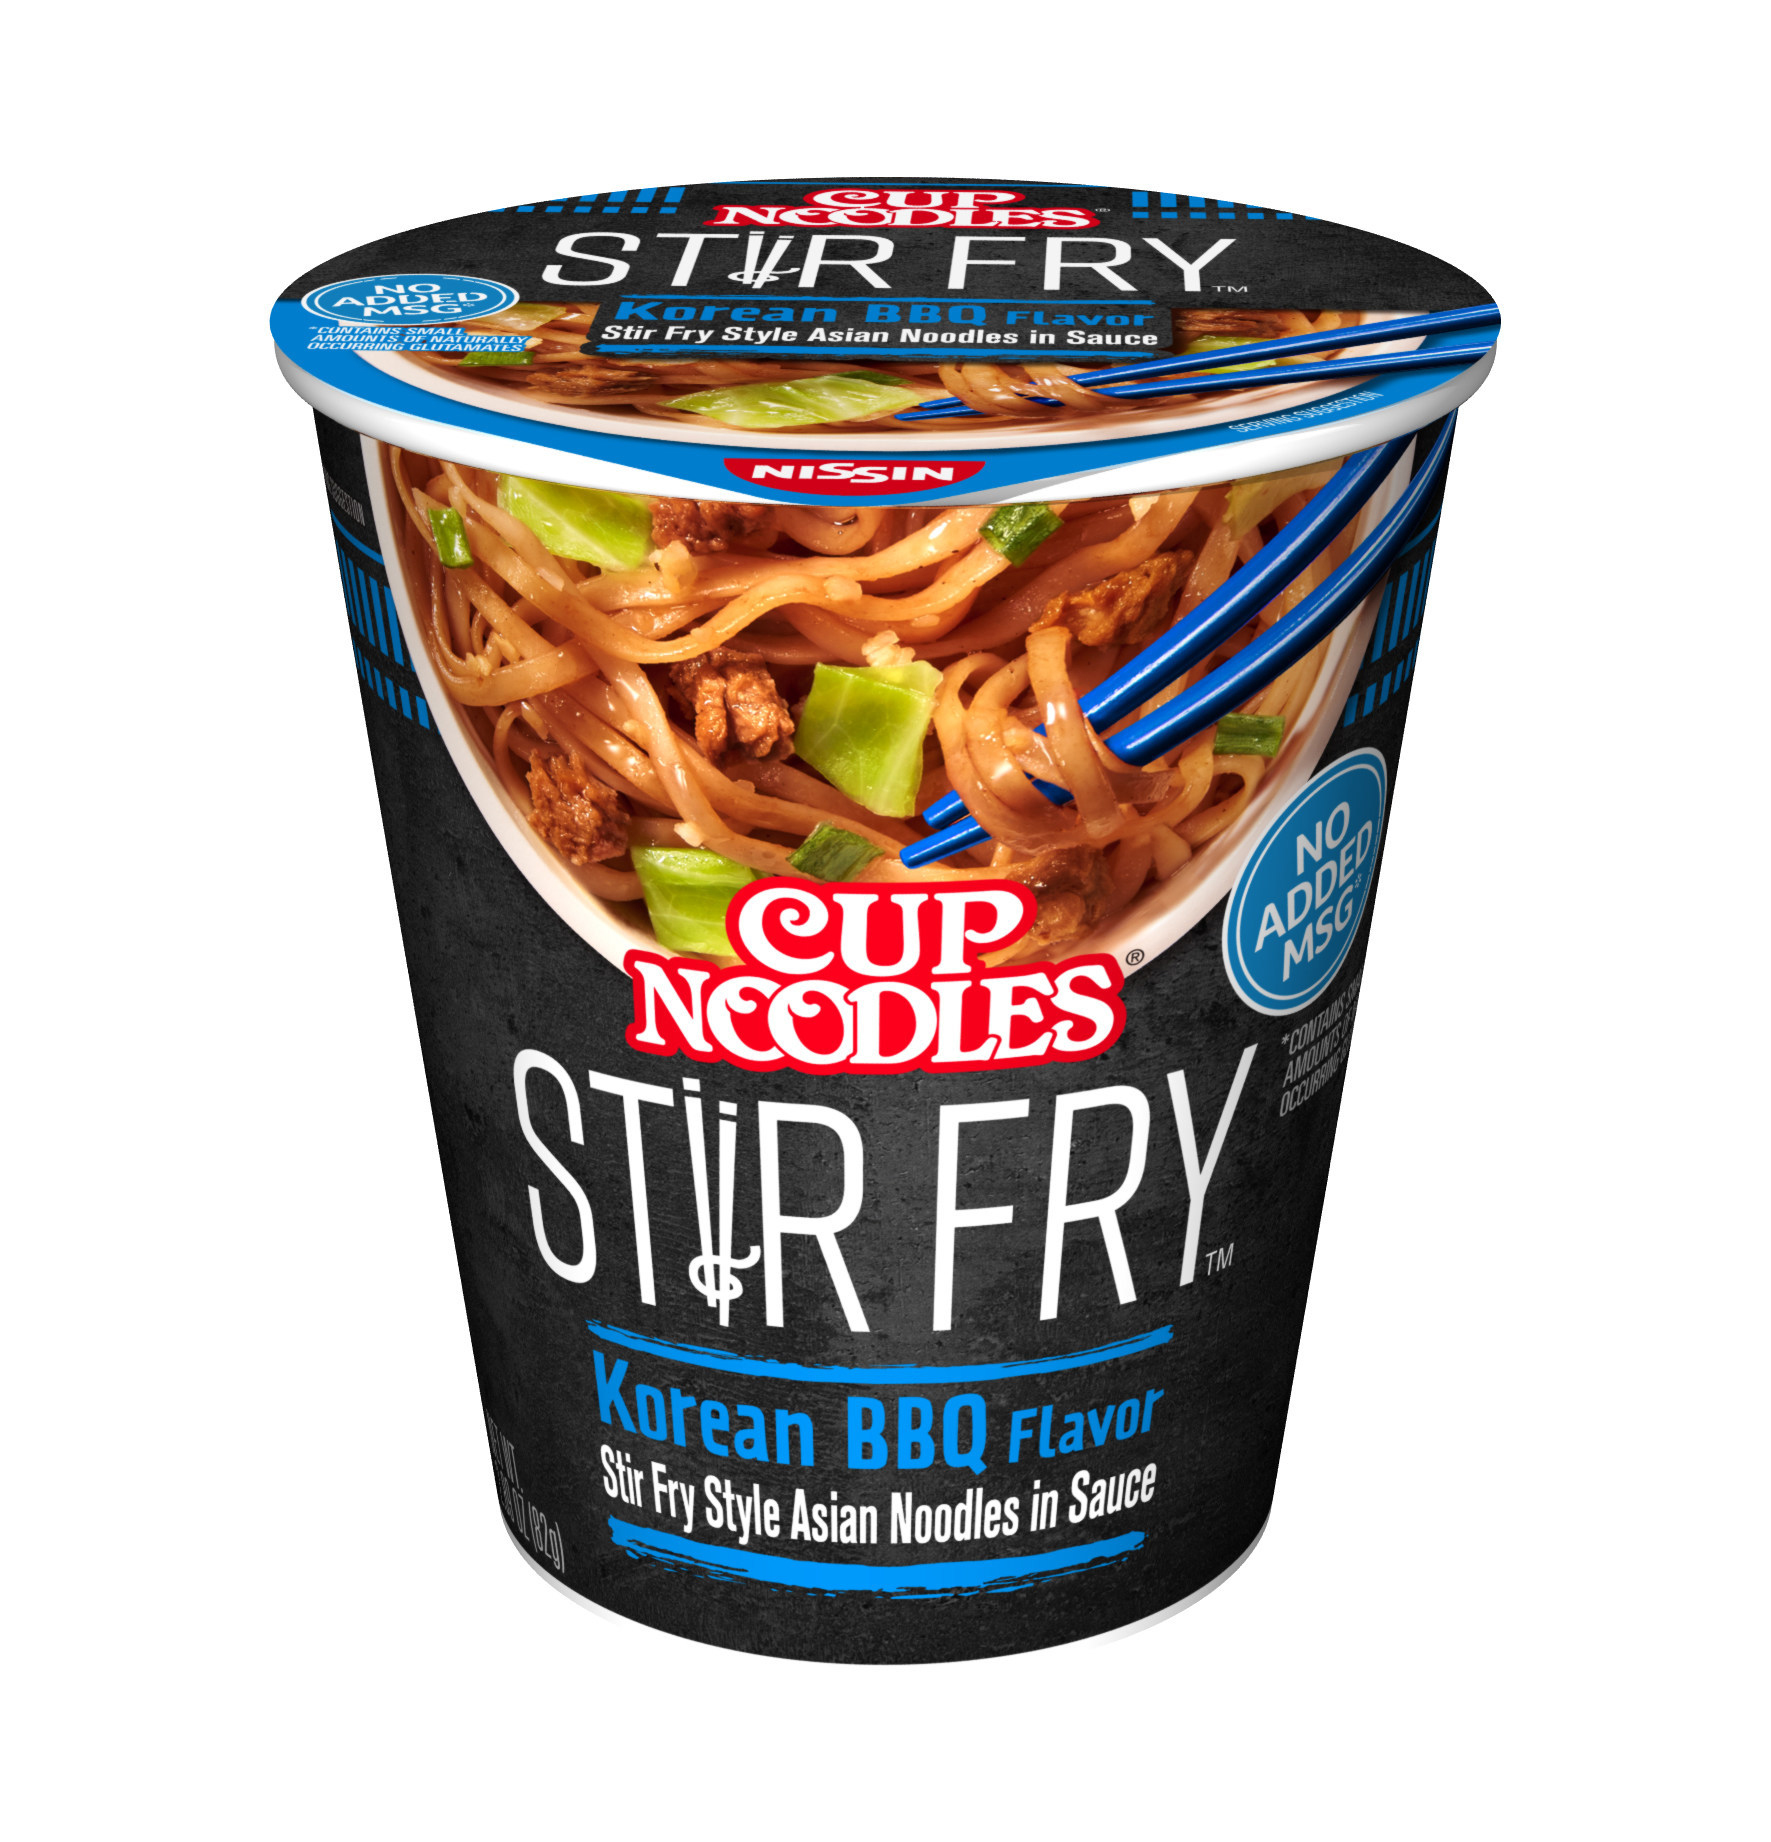 Nissin Foods Launches Cup Noodles Stir Fry, Soupless Take on Cup Noodles1771 x 1842